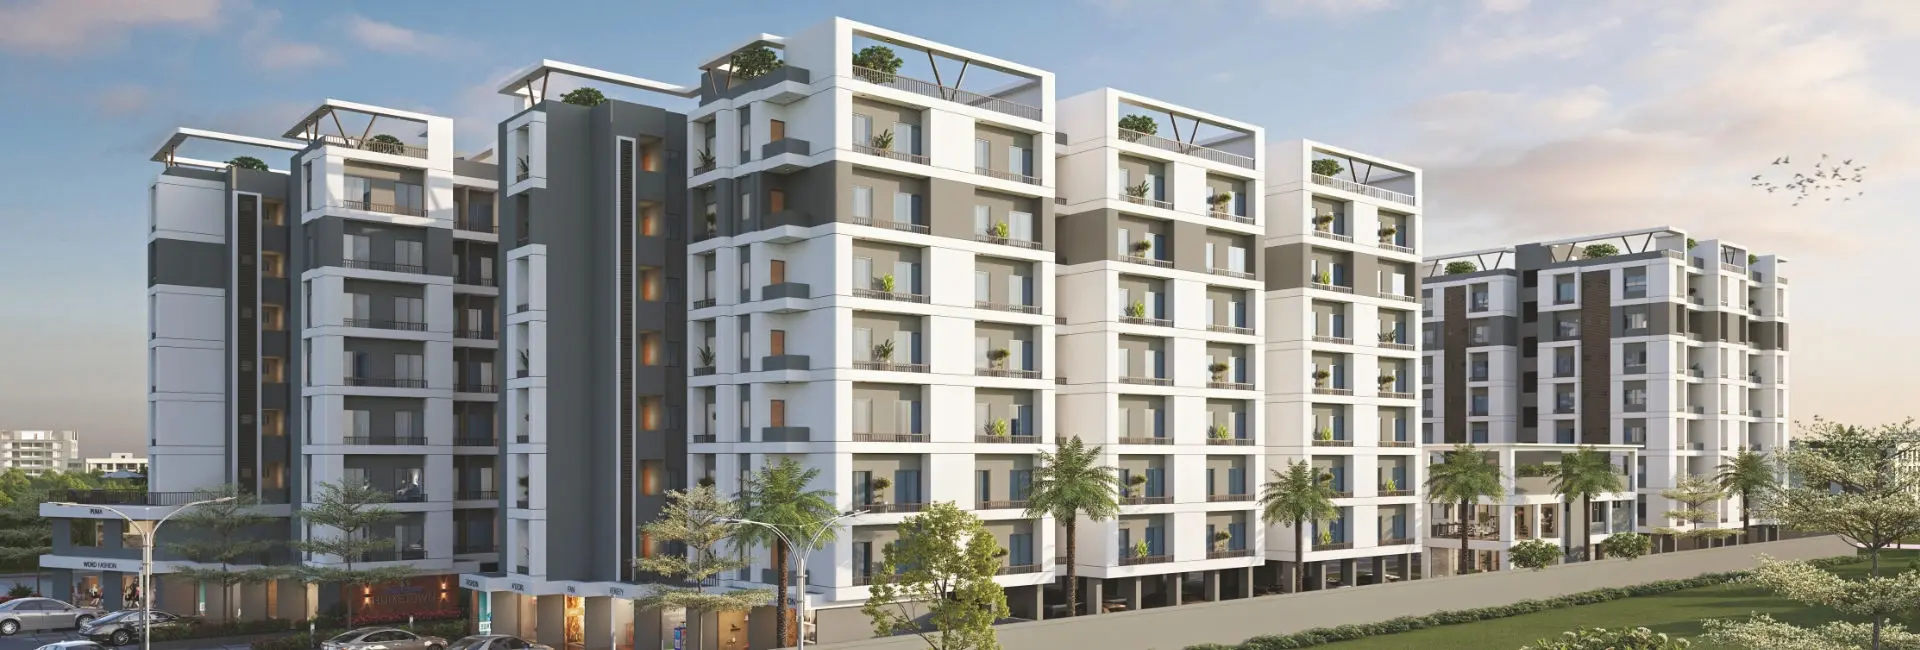 Residential and Commercial Property in Vadodara - Shree Siddheshwar Hometown